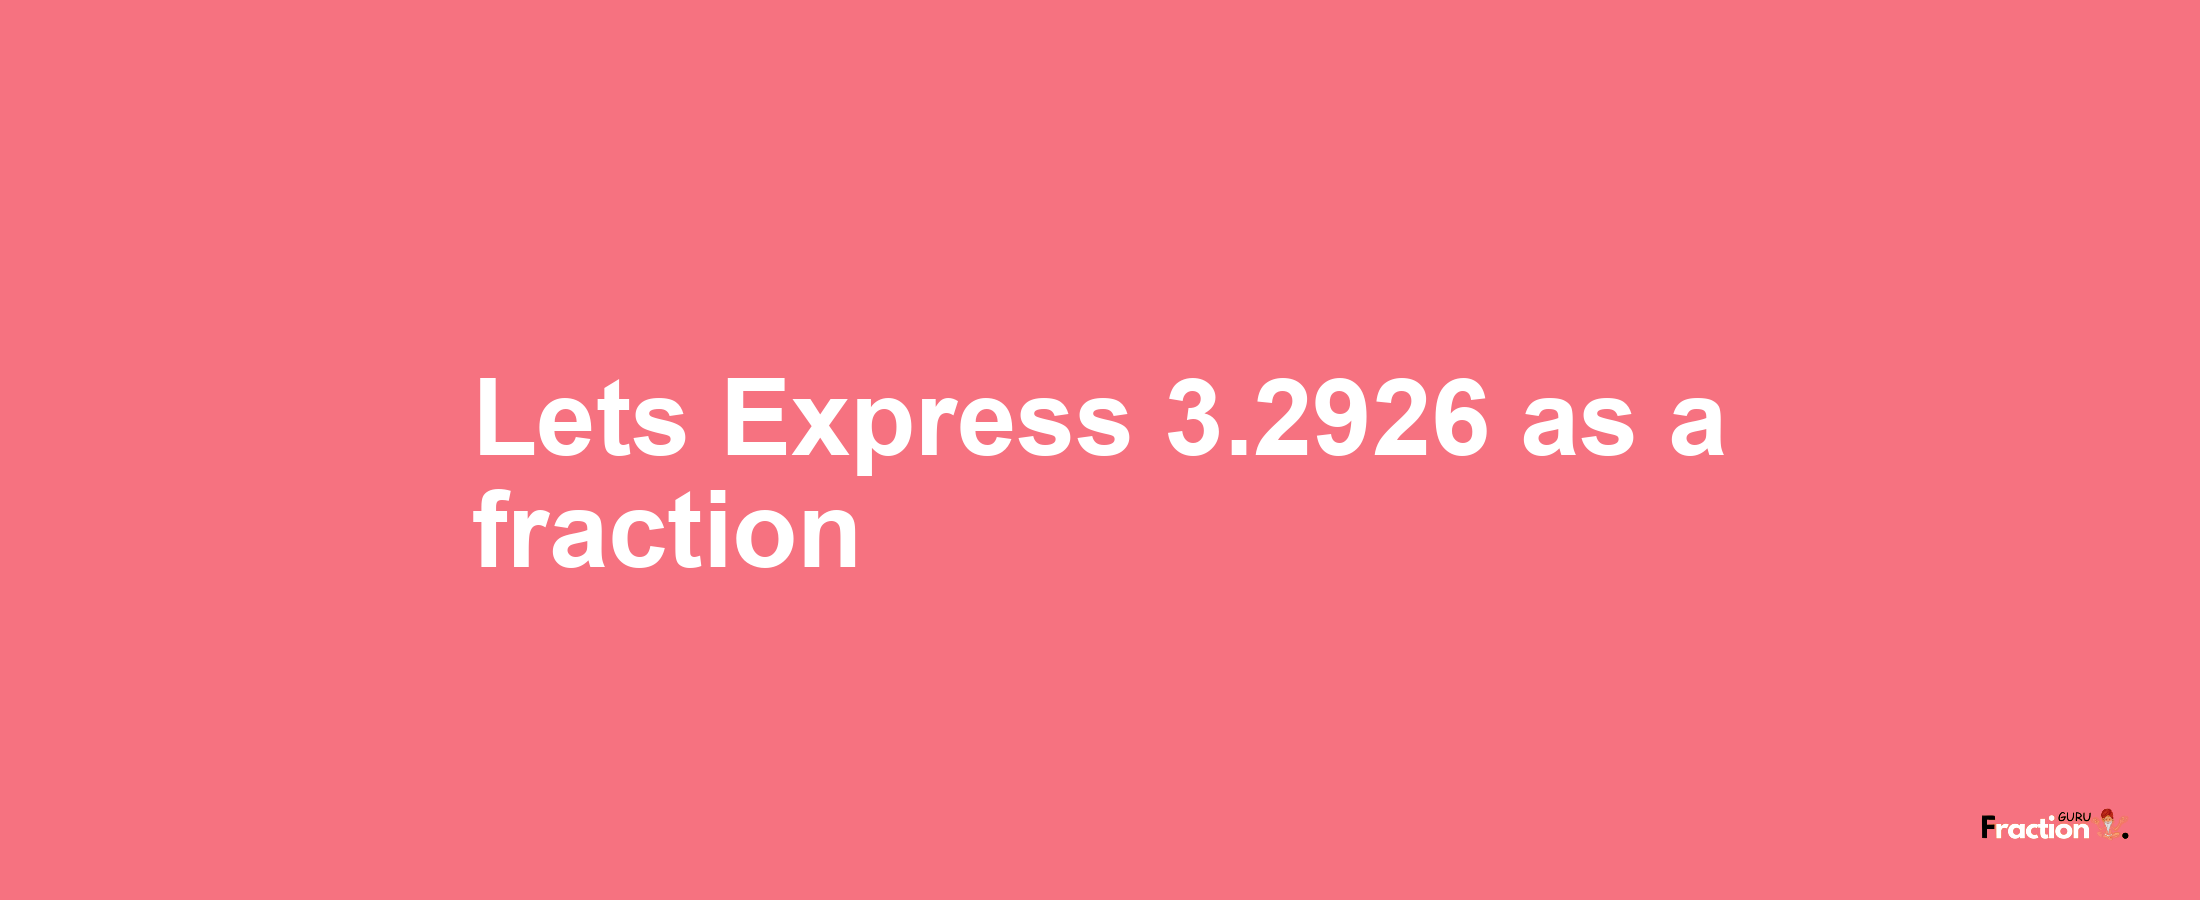 Lets Express 3.2926 as afraction